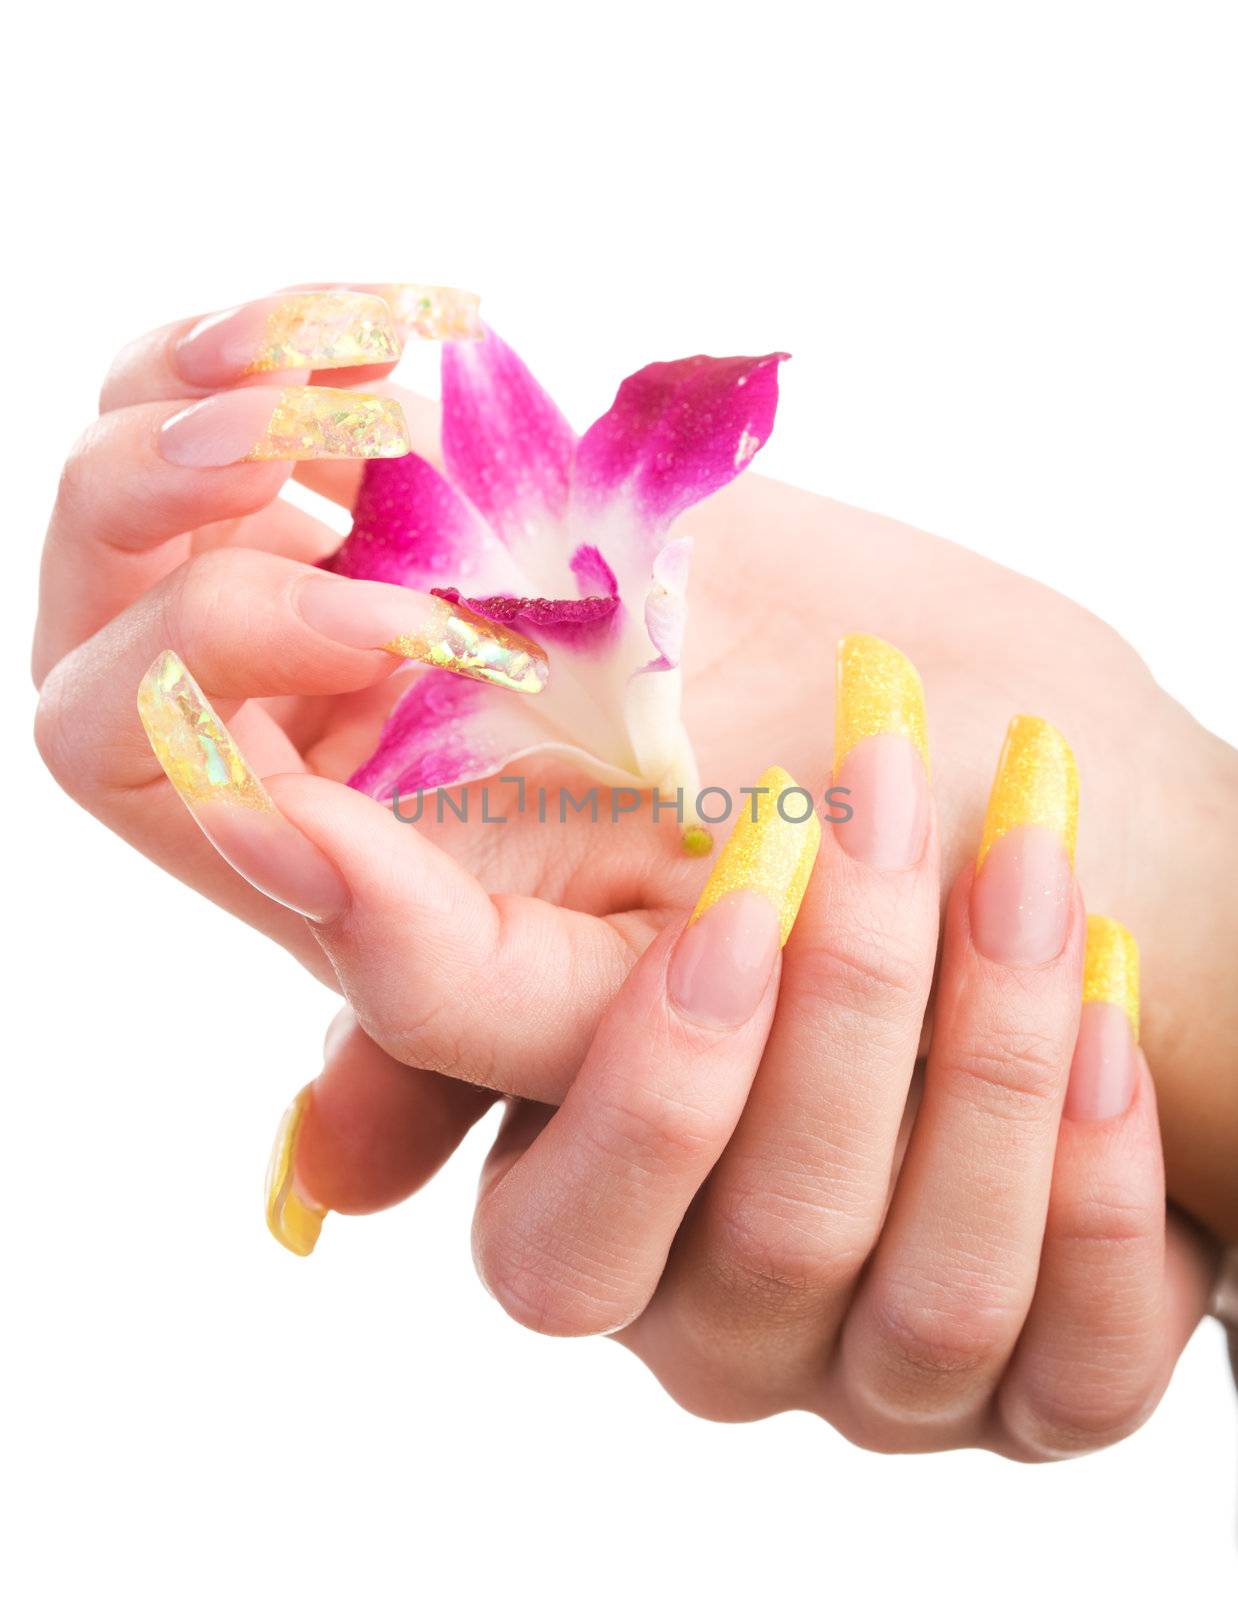 Closeup image of beautiful nails and woman fingers